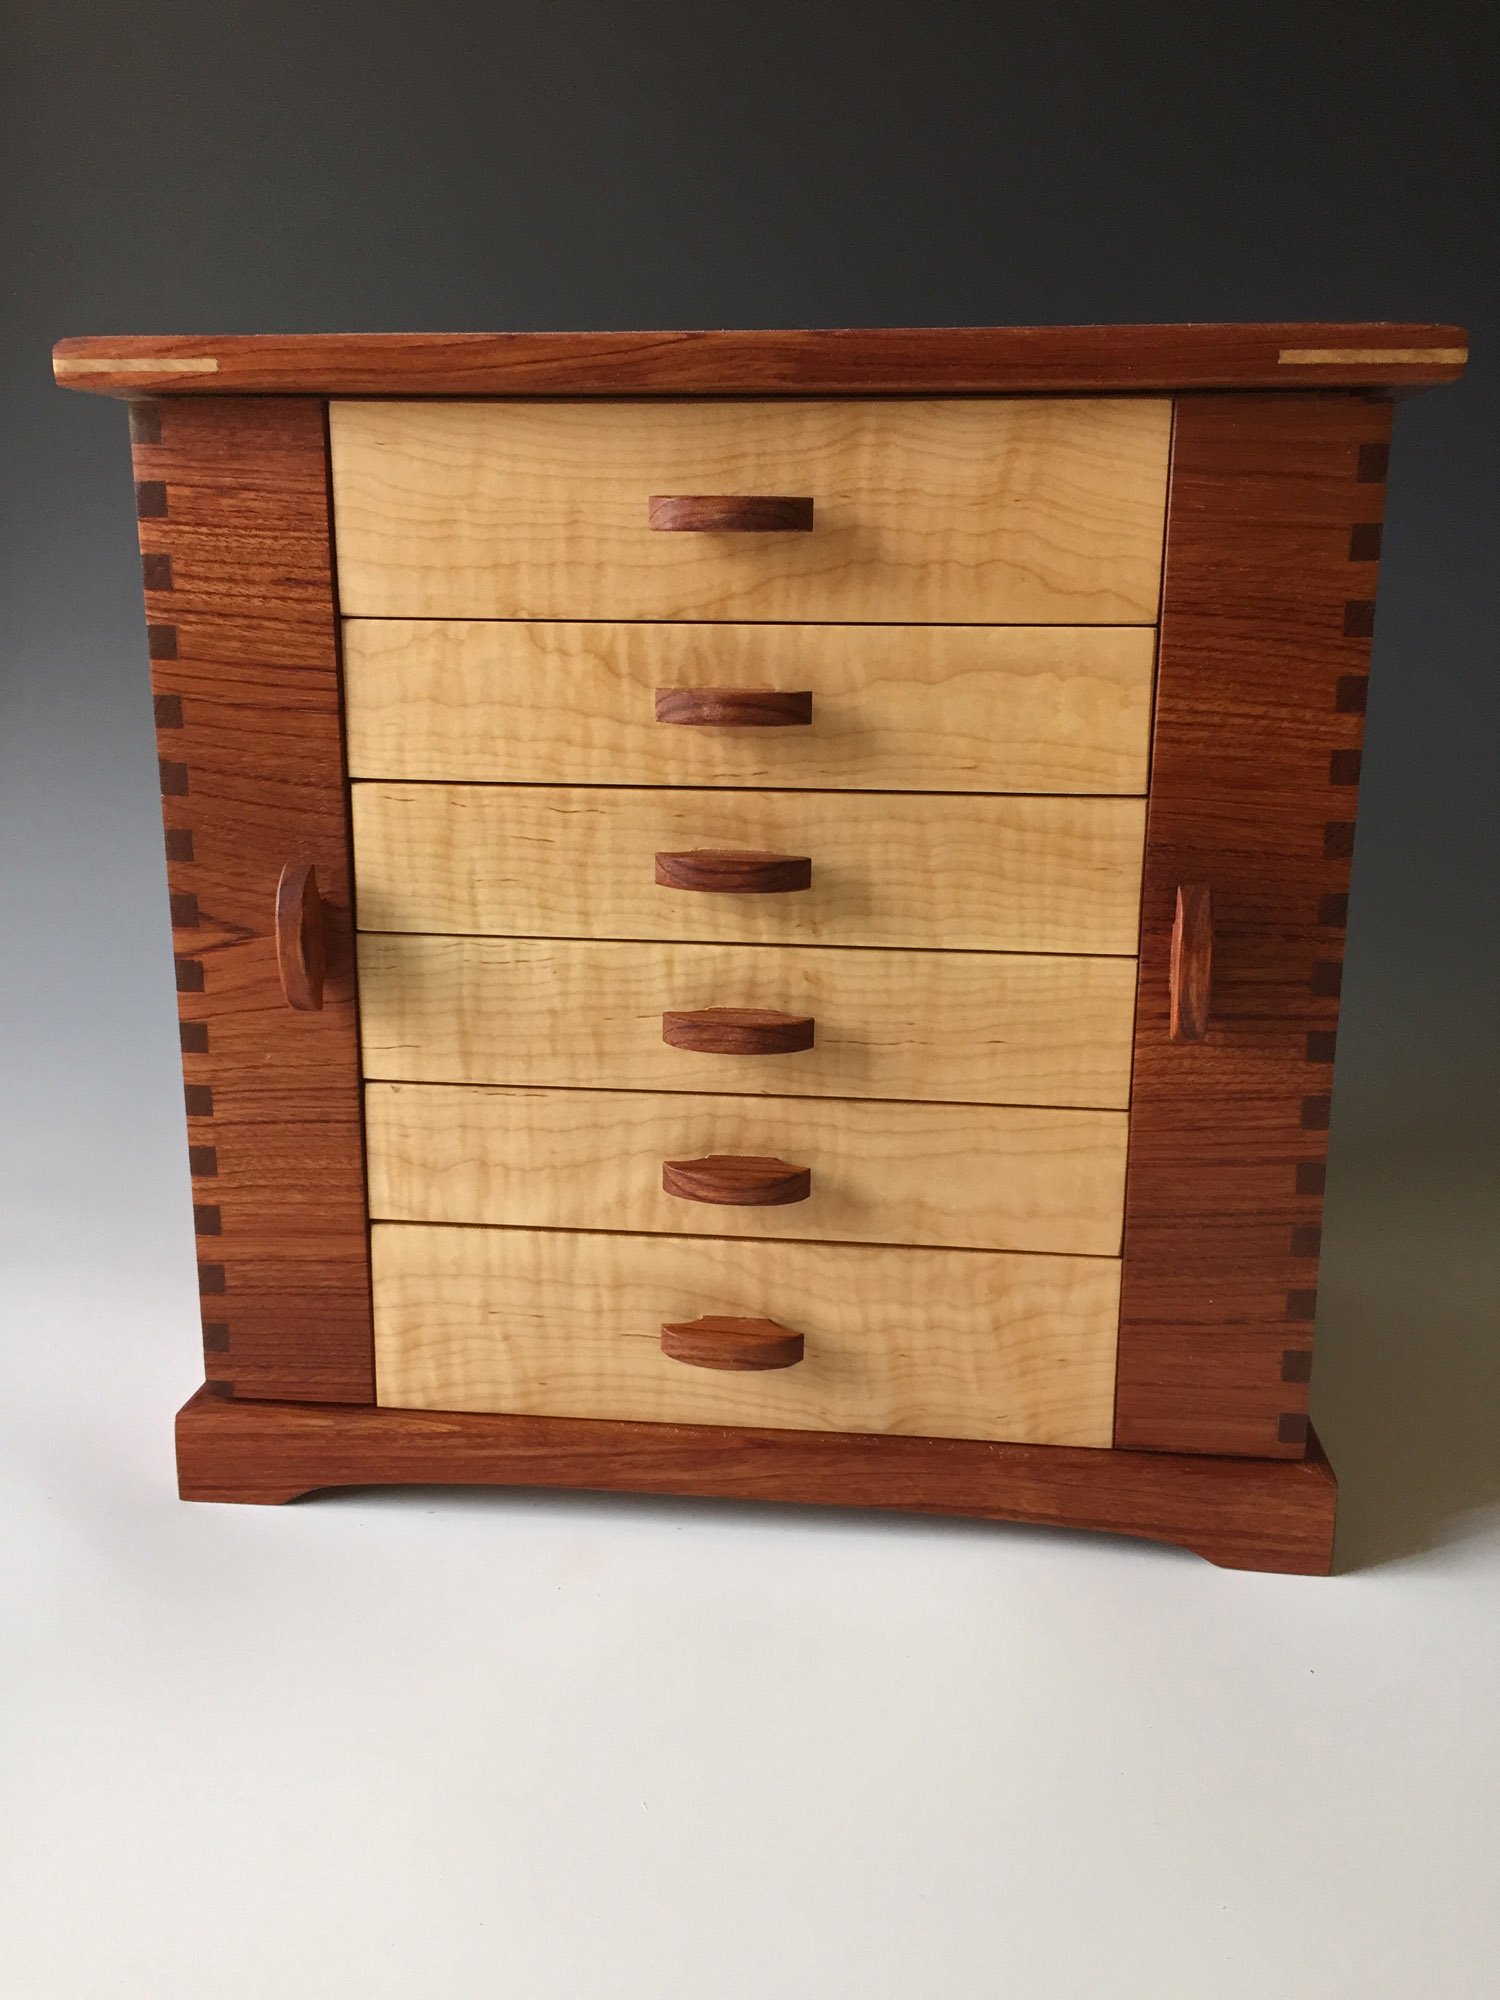 Another photo of a standing jewelry box shown in bubinga, a red wood from Africa.